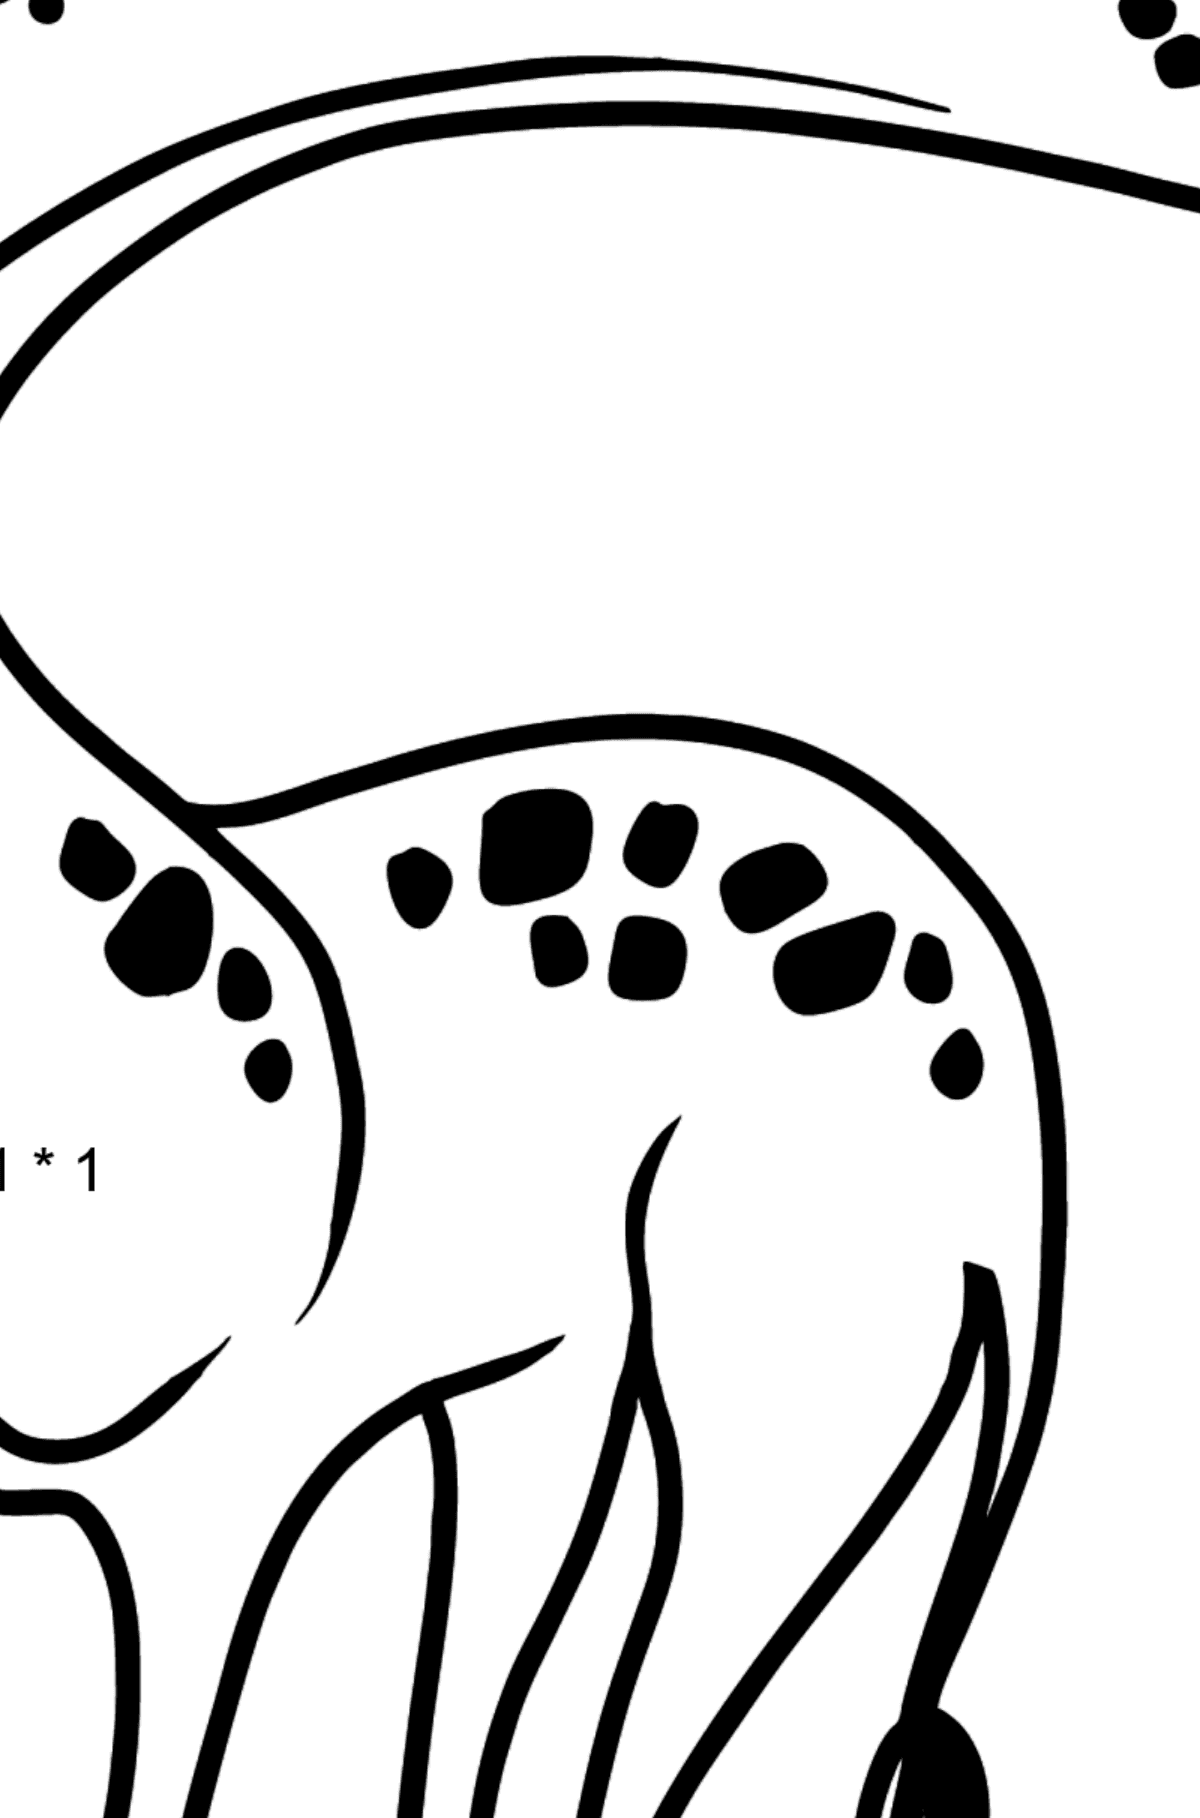 Giraffe coloring page - Math Coloring - Multiplication for Kids